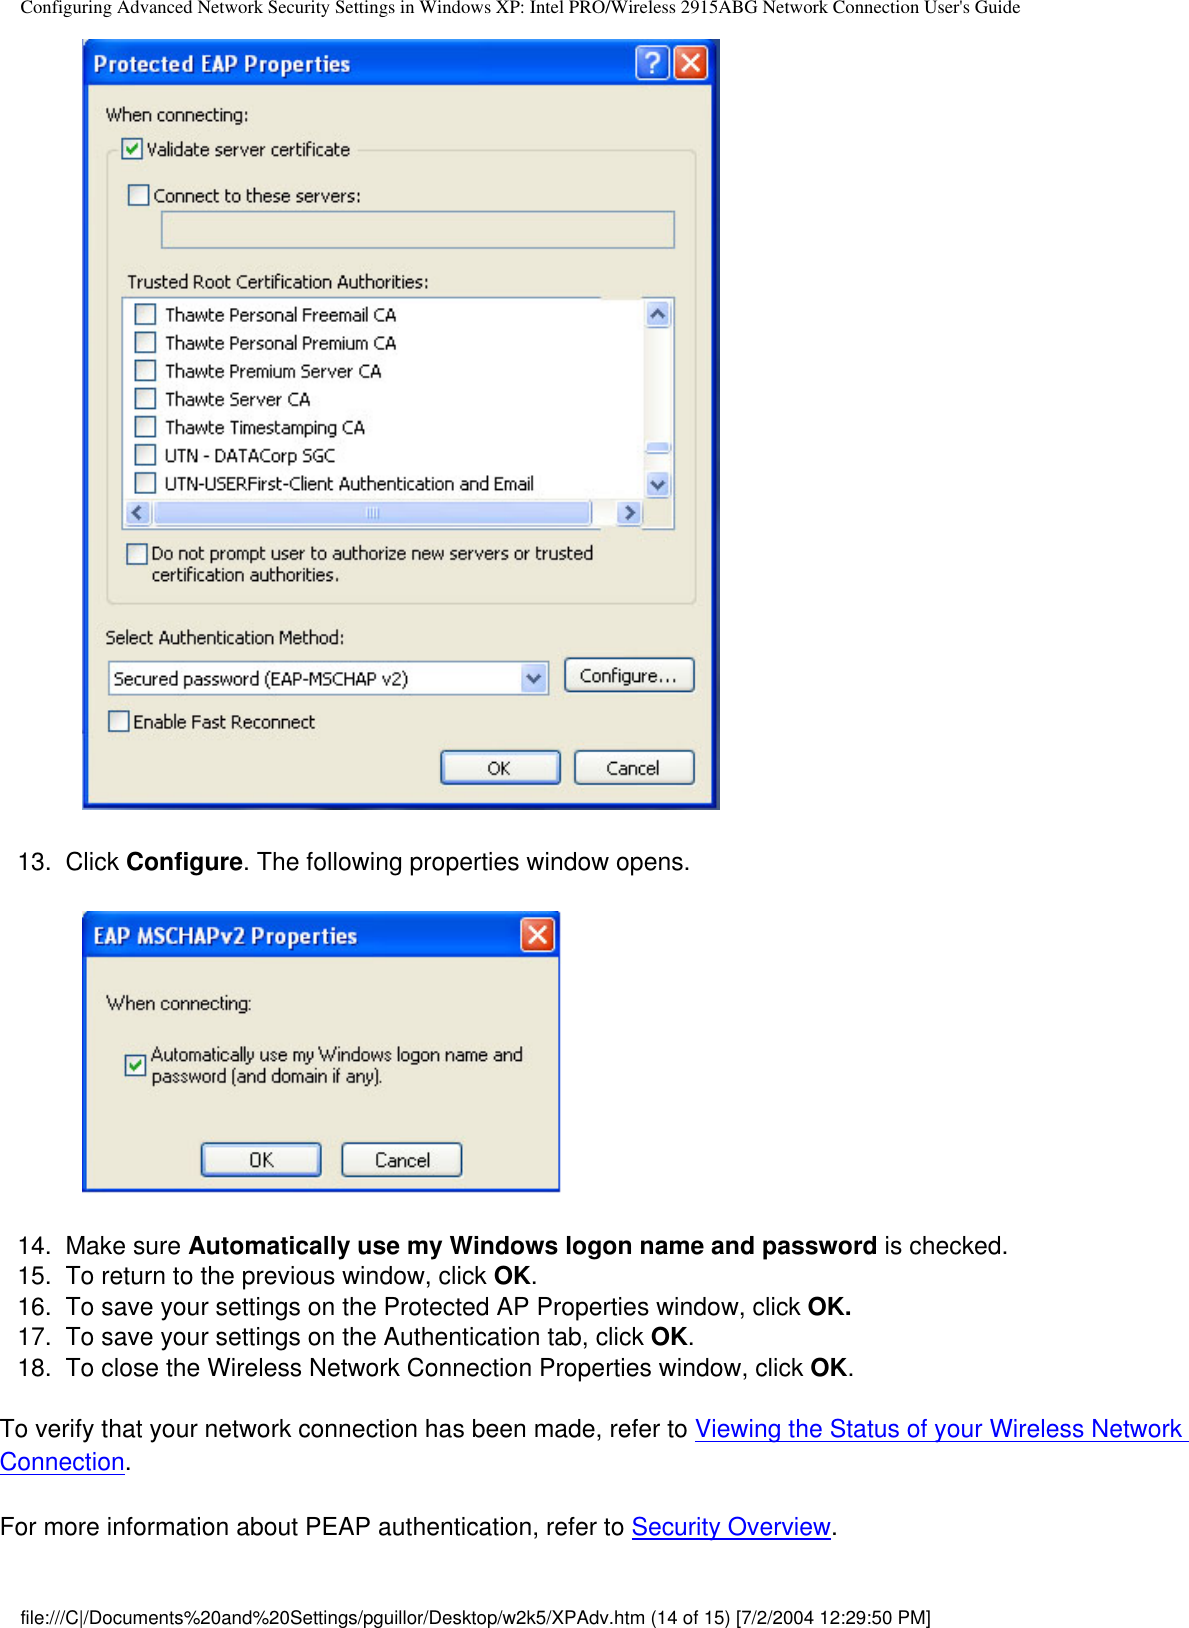 Configuring Advanced Network Security Settings in Windows XP: Intel PRO/Wireless 2915ABG Network Connection User&apos;s Guide            13.  Click Configure. The following properties window opens.              14.  Make sure Automatically use my Windows logon name and password is checked. 15.  To return to the previous window, click OK.16.  To save your settings on the Protected AP Properties window, click OK. 17.  To save your settings on the Authentication tab, click OK.18.  To close the Wireless Network Connection Properties window, click OK.To verify that your network connection has been made, refer to Viewing the Status of your Wireless Network Connection. For more information about PEAP authentication, refer to Security Overview.file:///C|/Documents%20and%20Settings/pguillor/Desktop/w2k5/XPAdv.htm (14 of 15) [7/2/2004 12:29:50 PM]